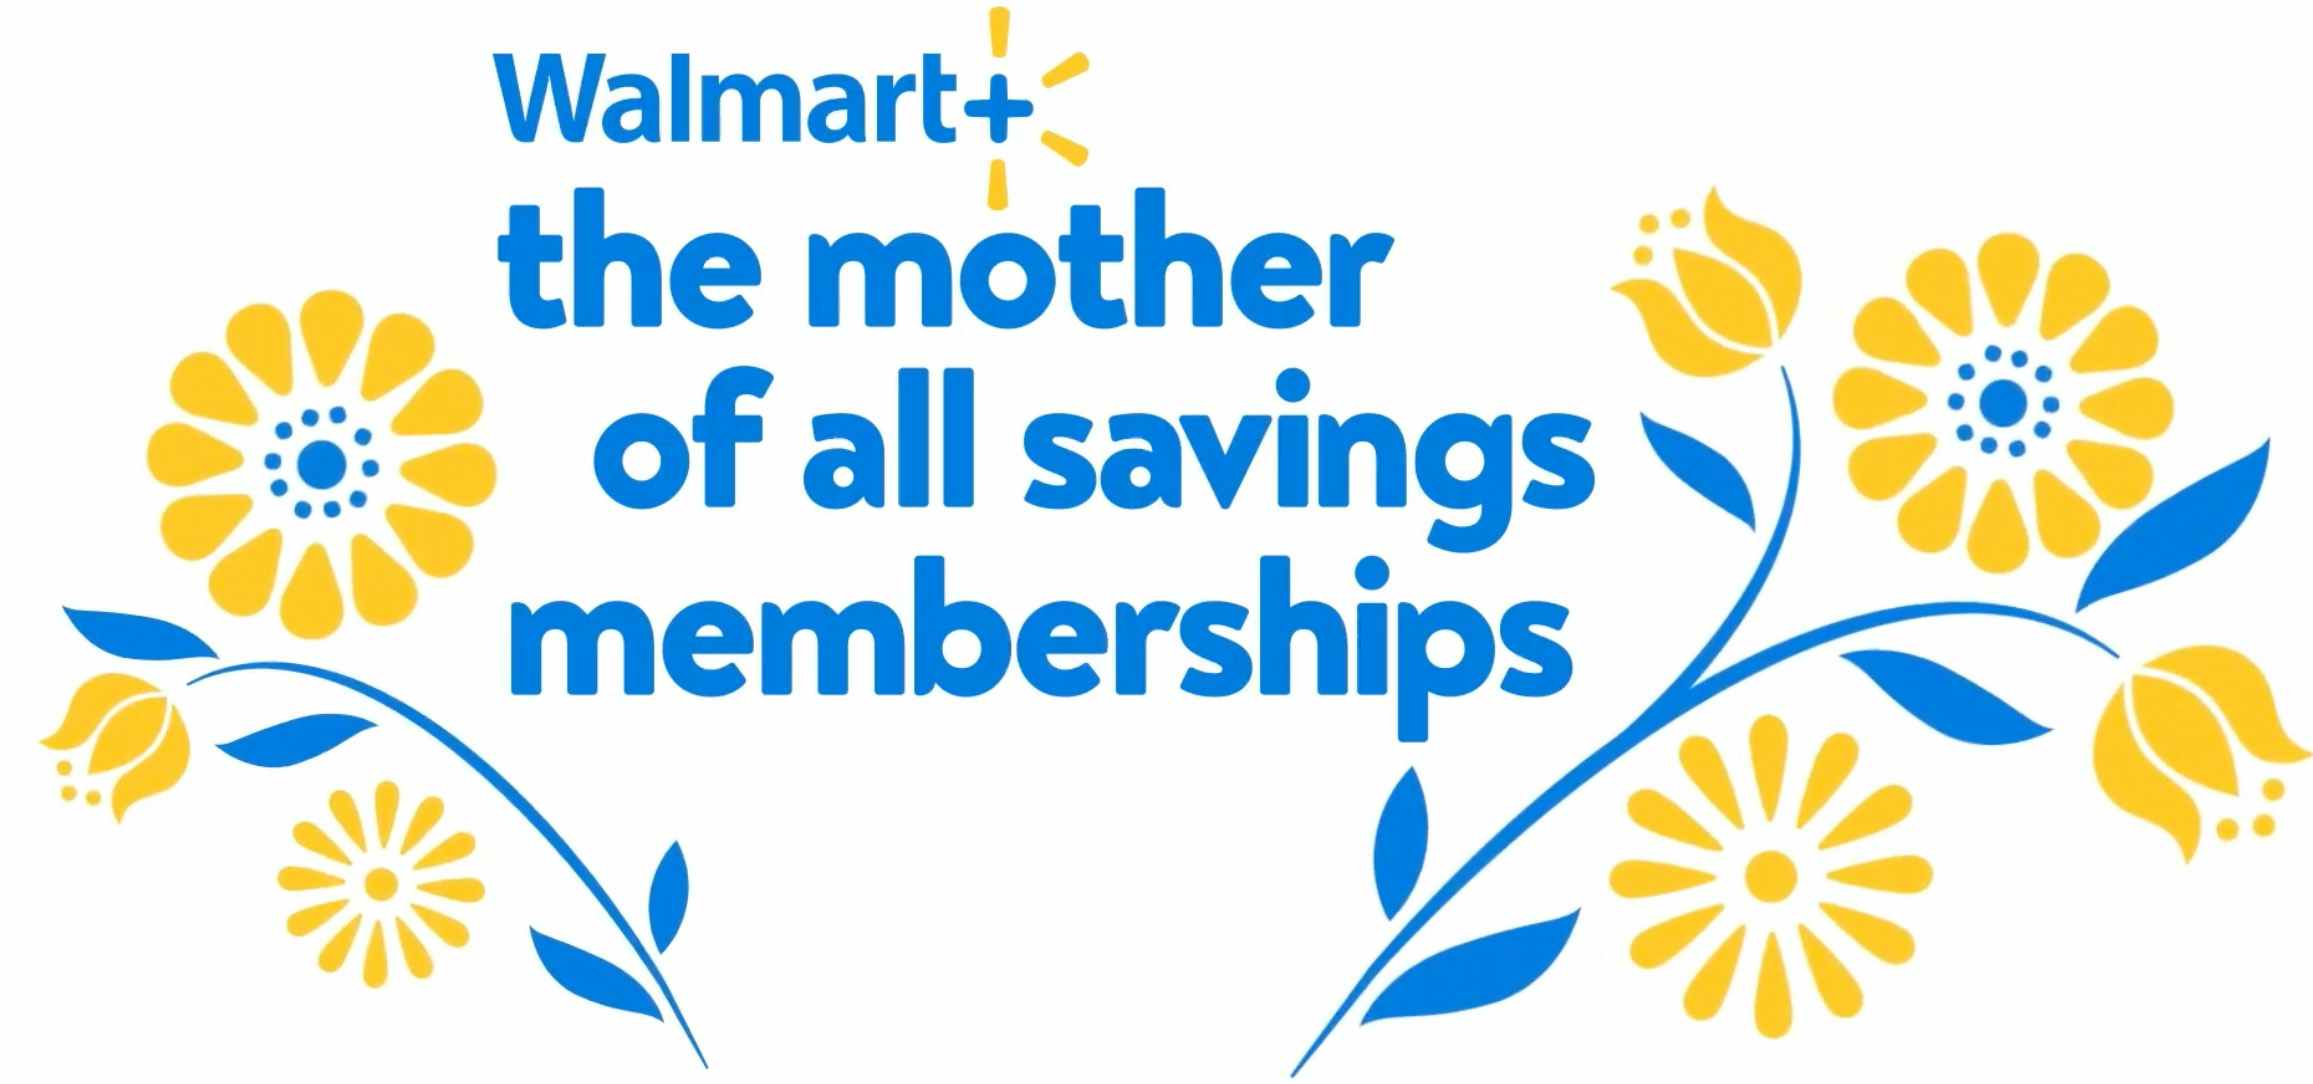 A graphic with flowers that reads, "Walmart+, the mother of all savings memberships